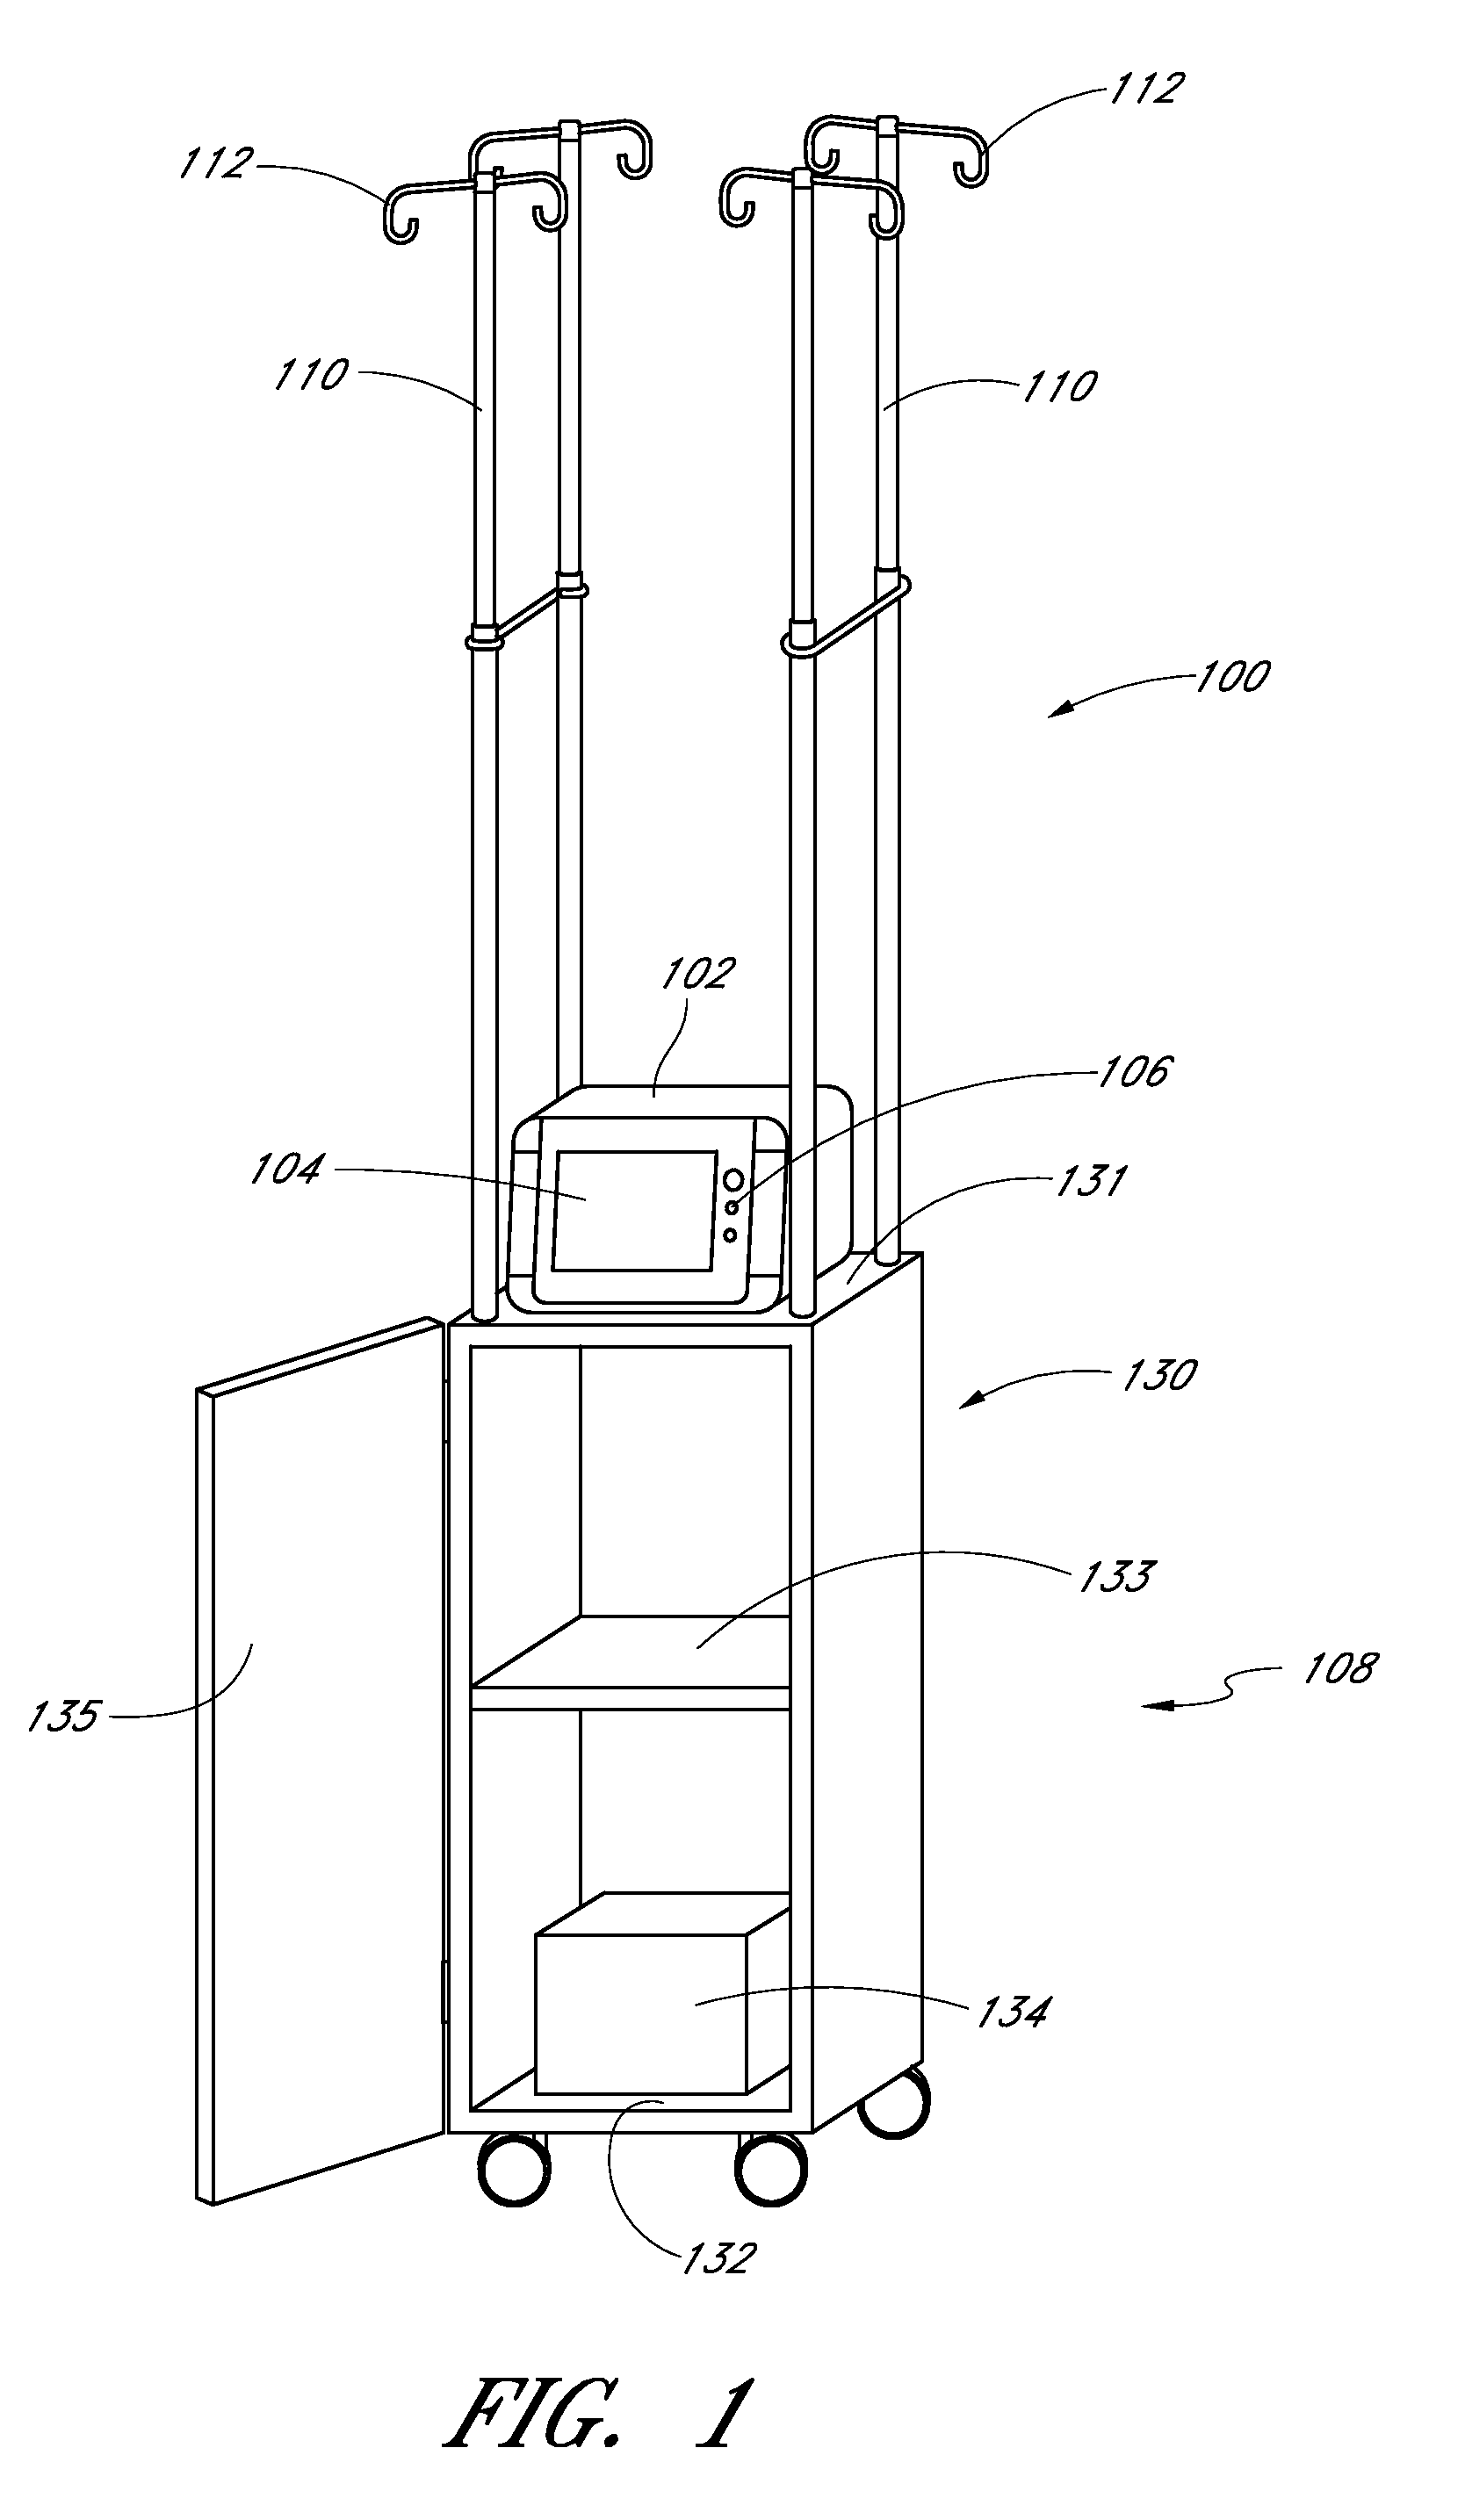 Fluid injection and safety system